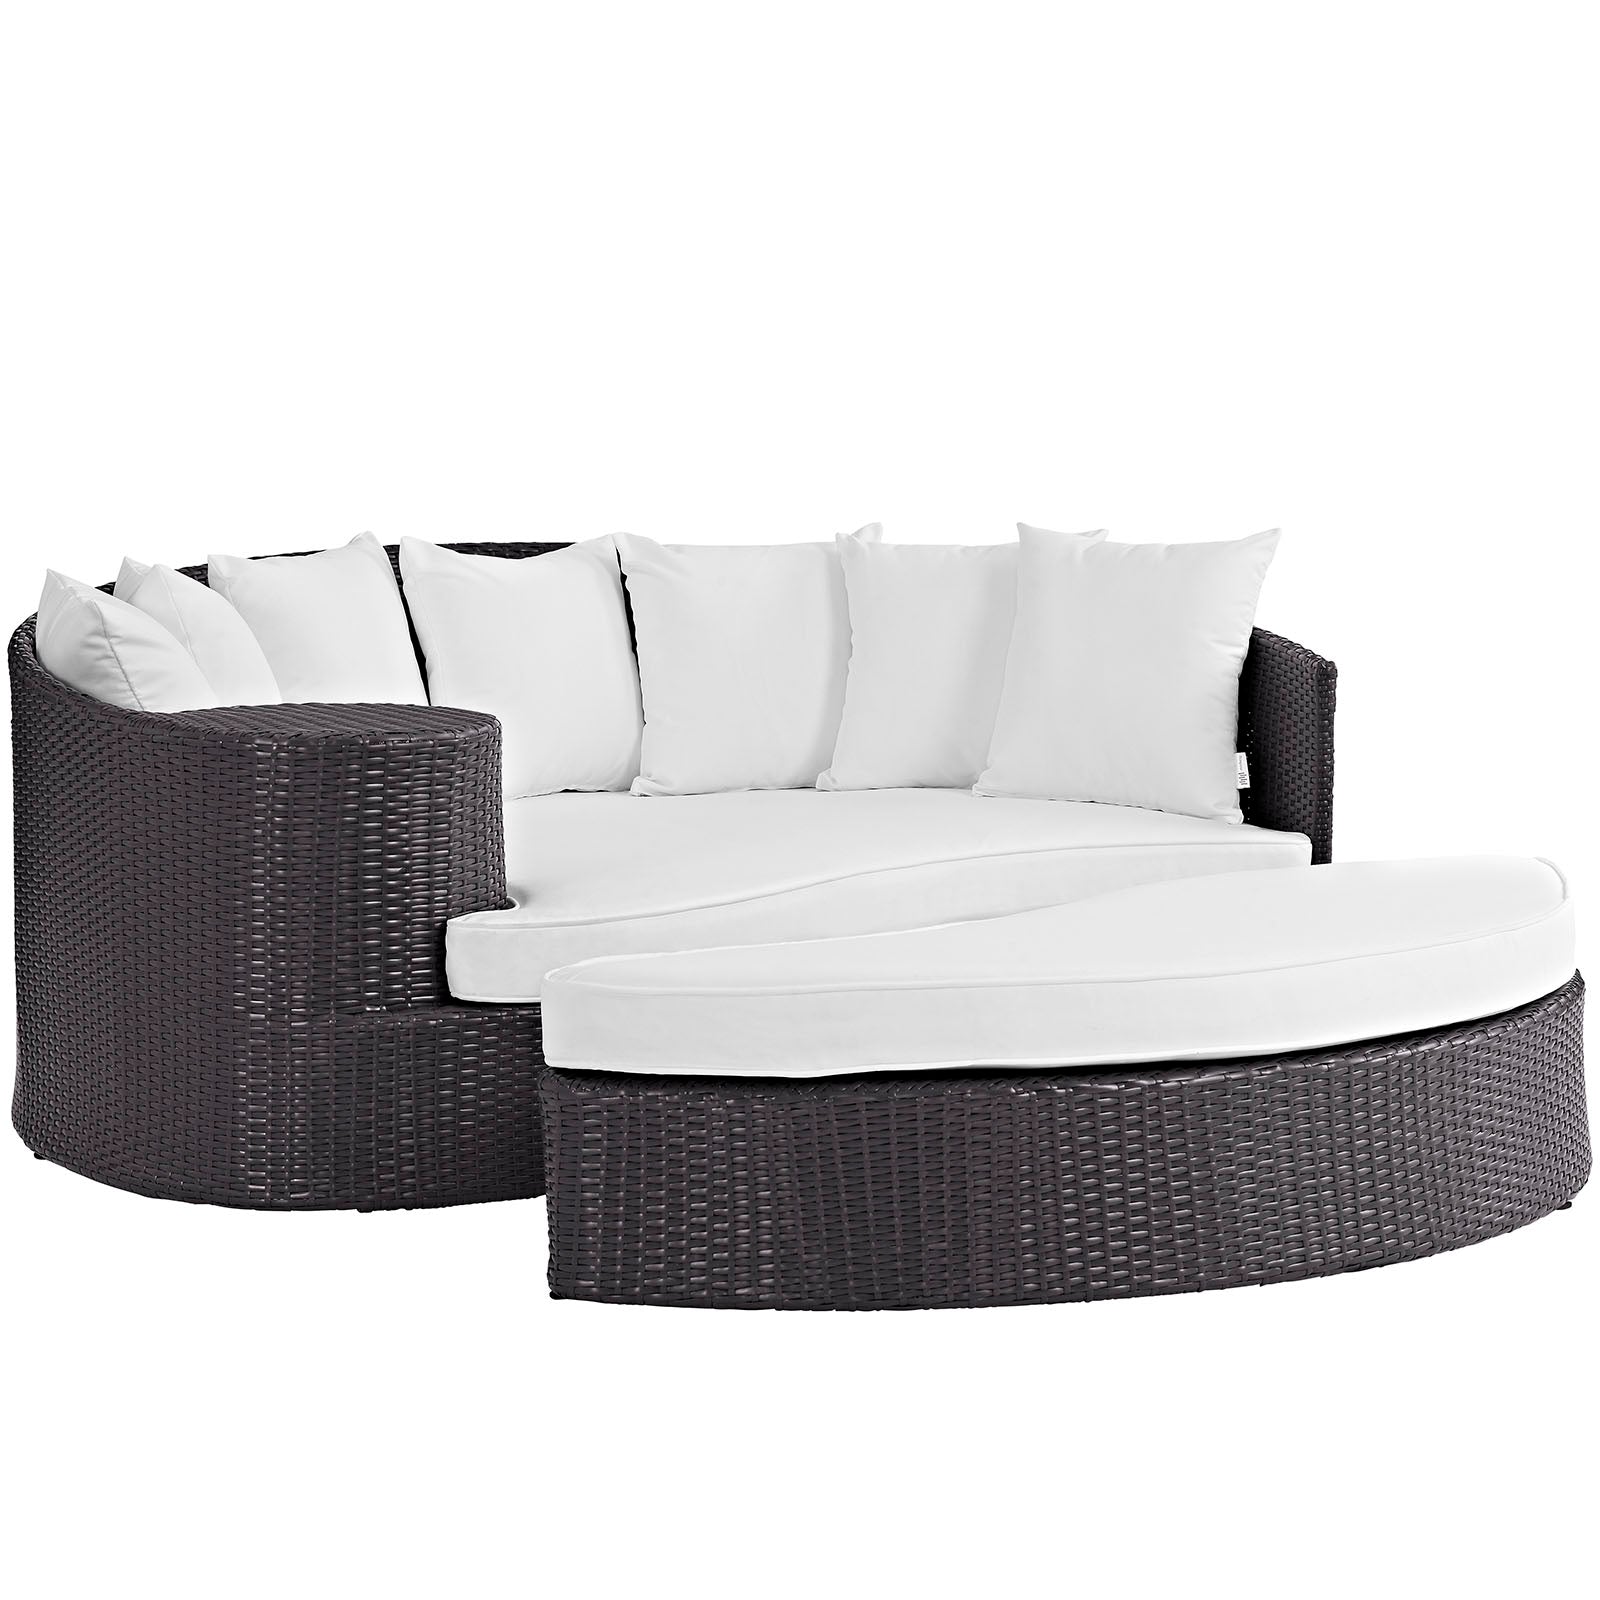 Modway Patio Daybeds - Convene Outdoor Patio Daybed Espresso White